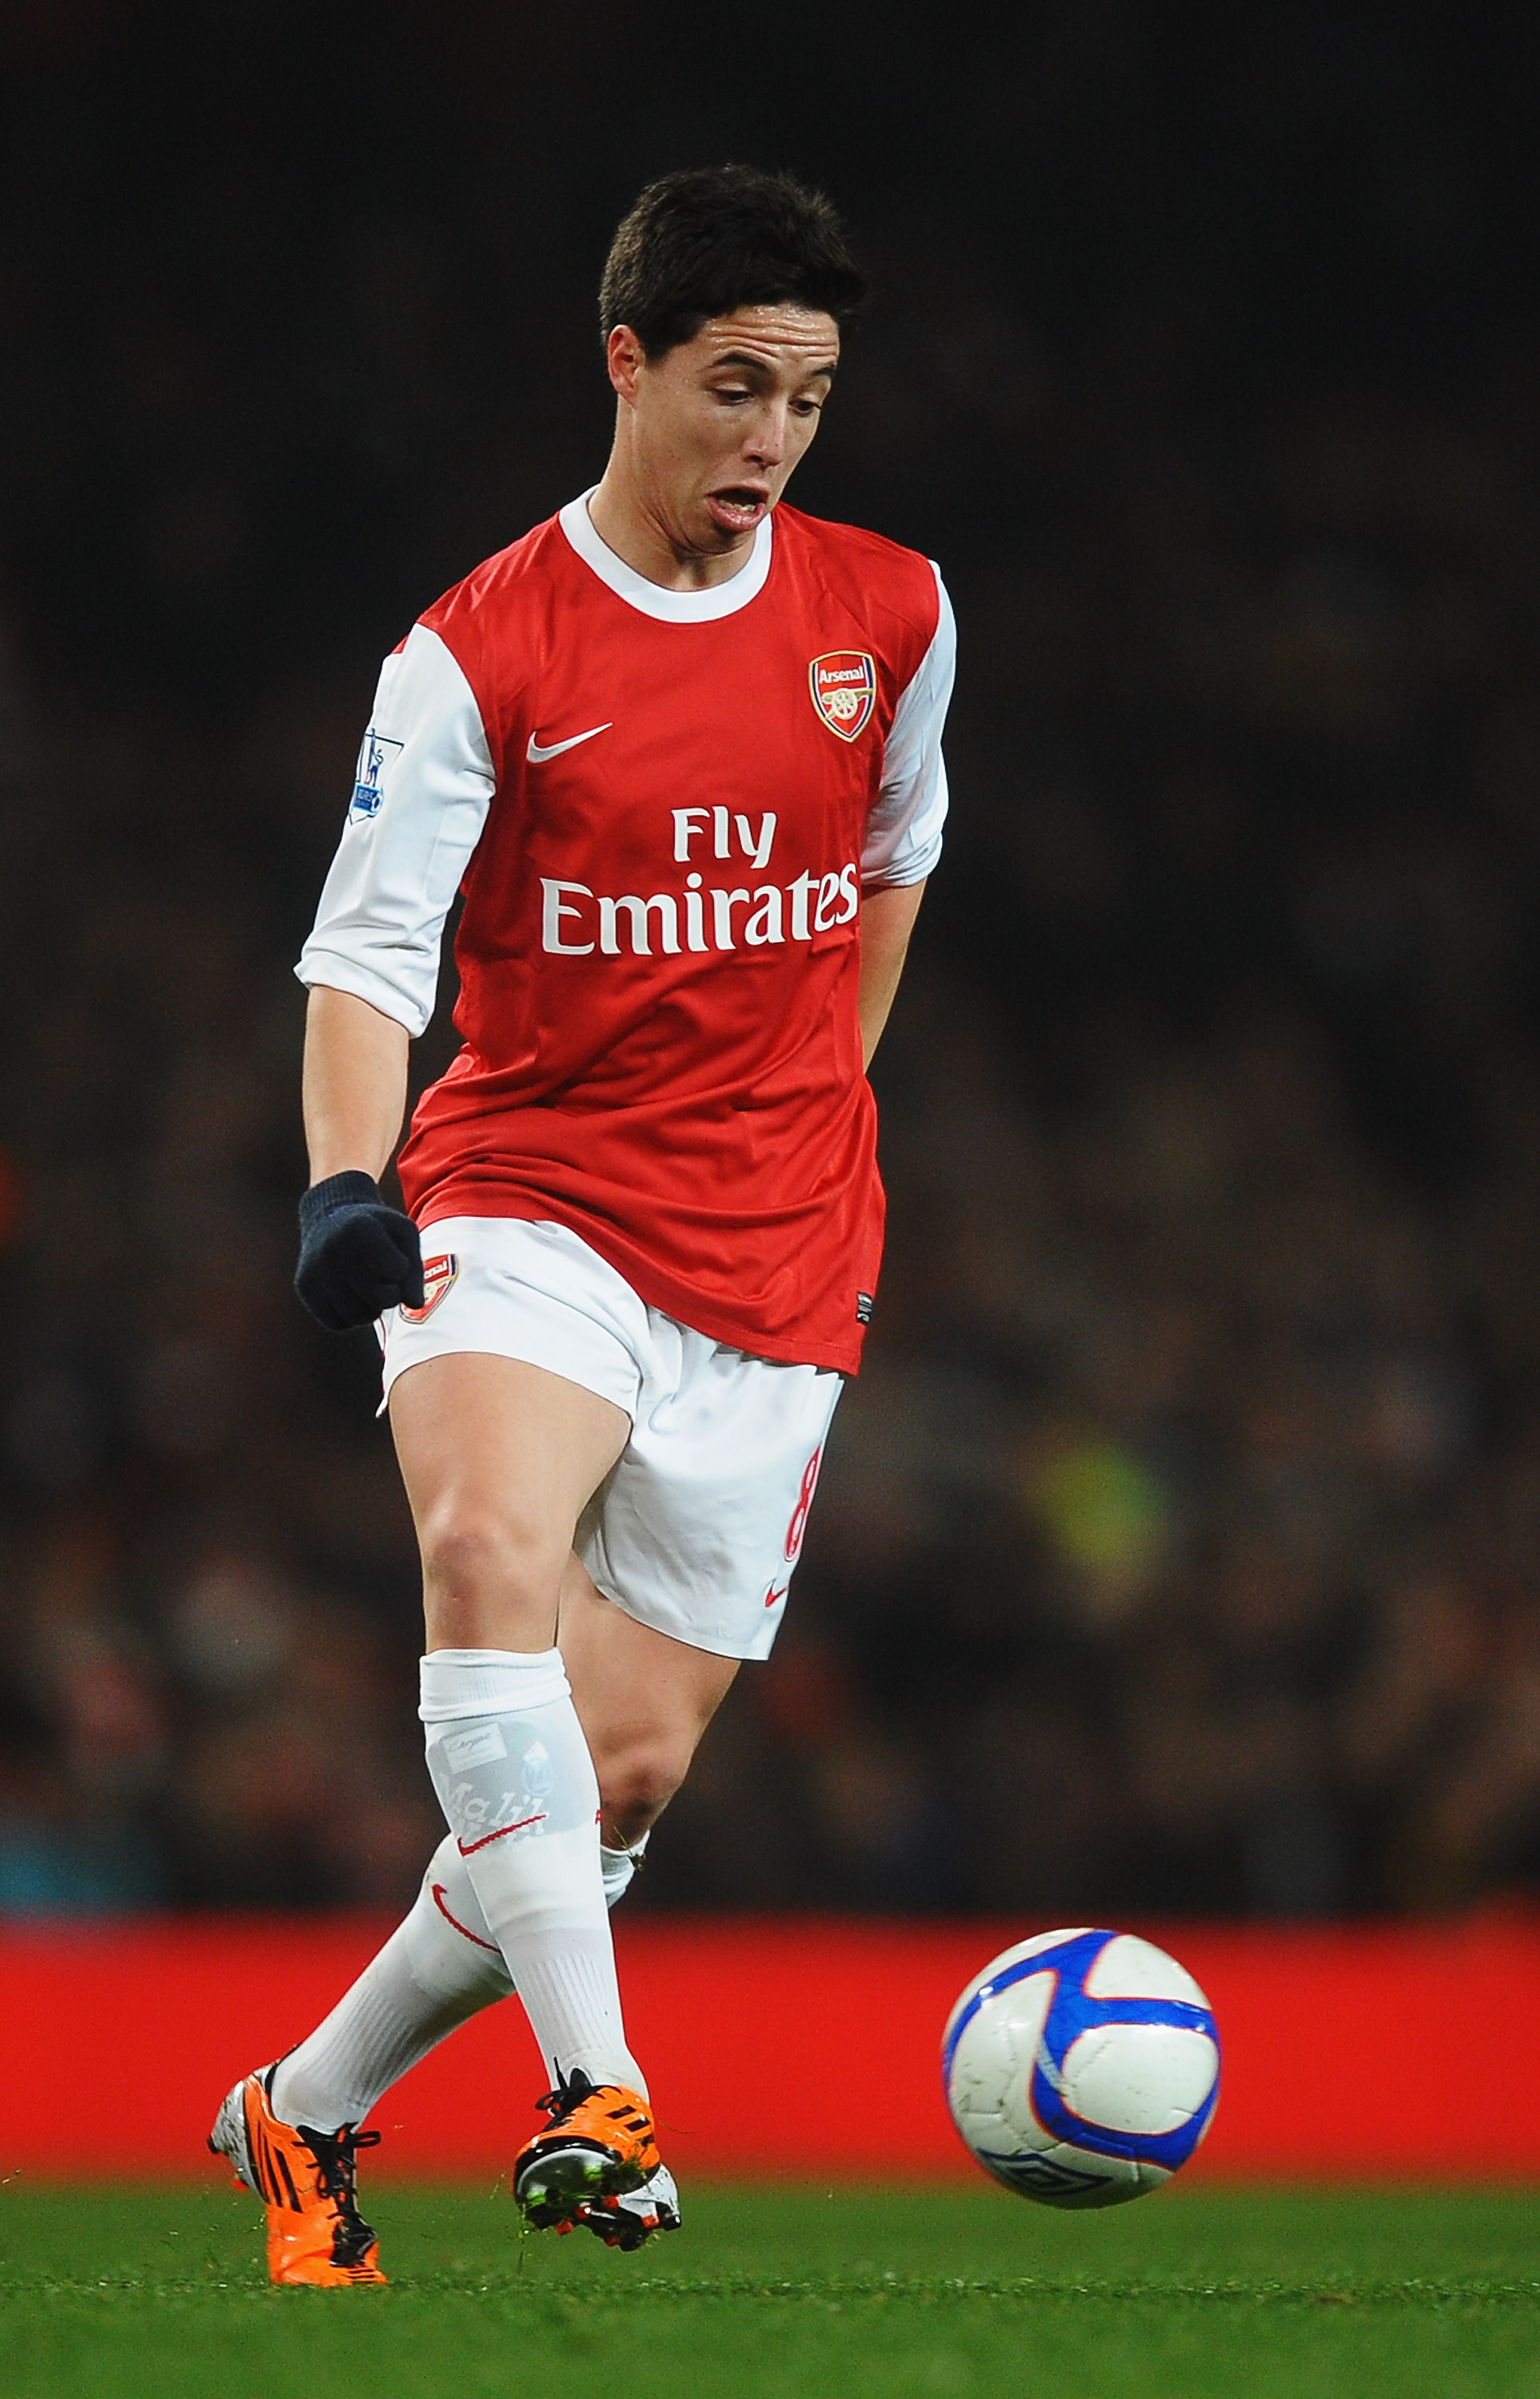 LONDON, UNITED KINGDOM - MARCH 02:  Samir Nasri of Arsenal runs with the ball during the FA Cup sponsored by E.ON 5th Round Replay match between between Arsenal and Leyton Orient at the Emirates Stadium on March 2, 2011 in London, England.  (Photo by Laur